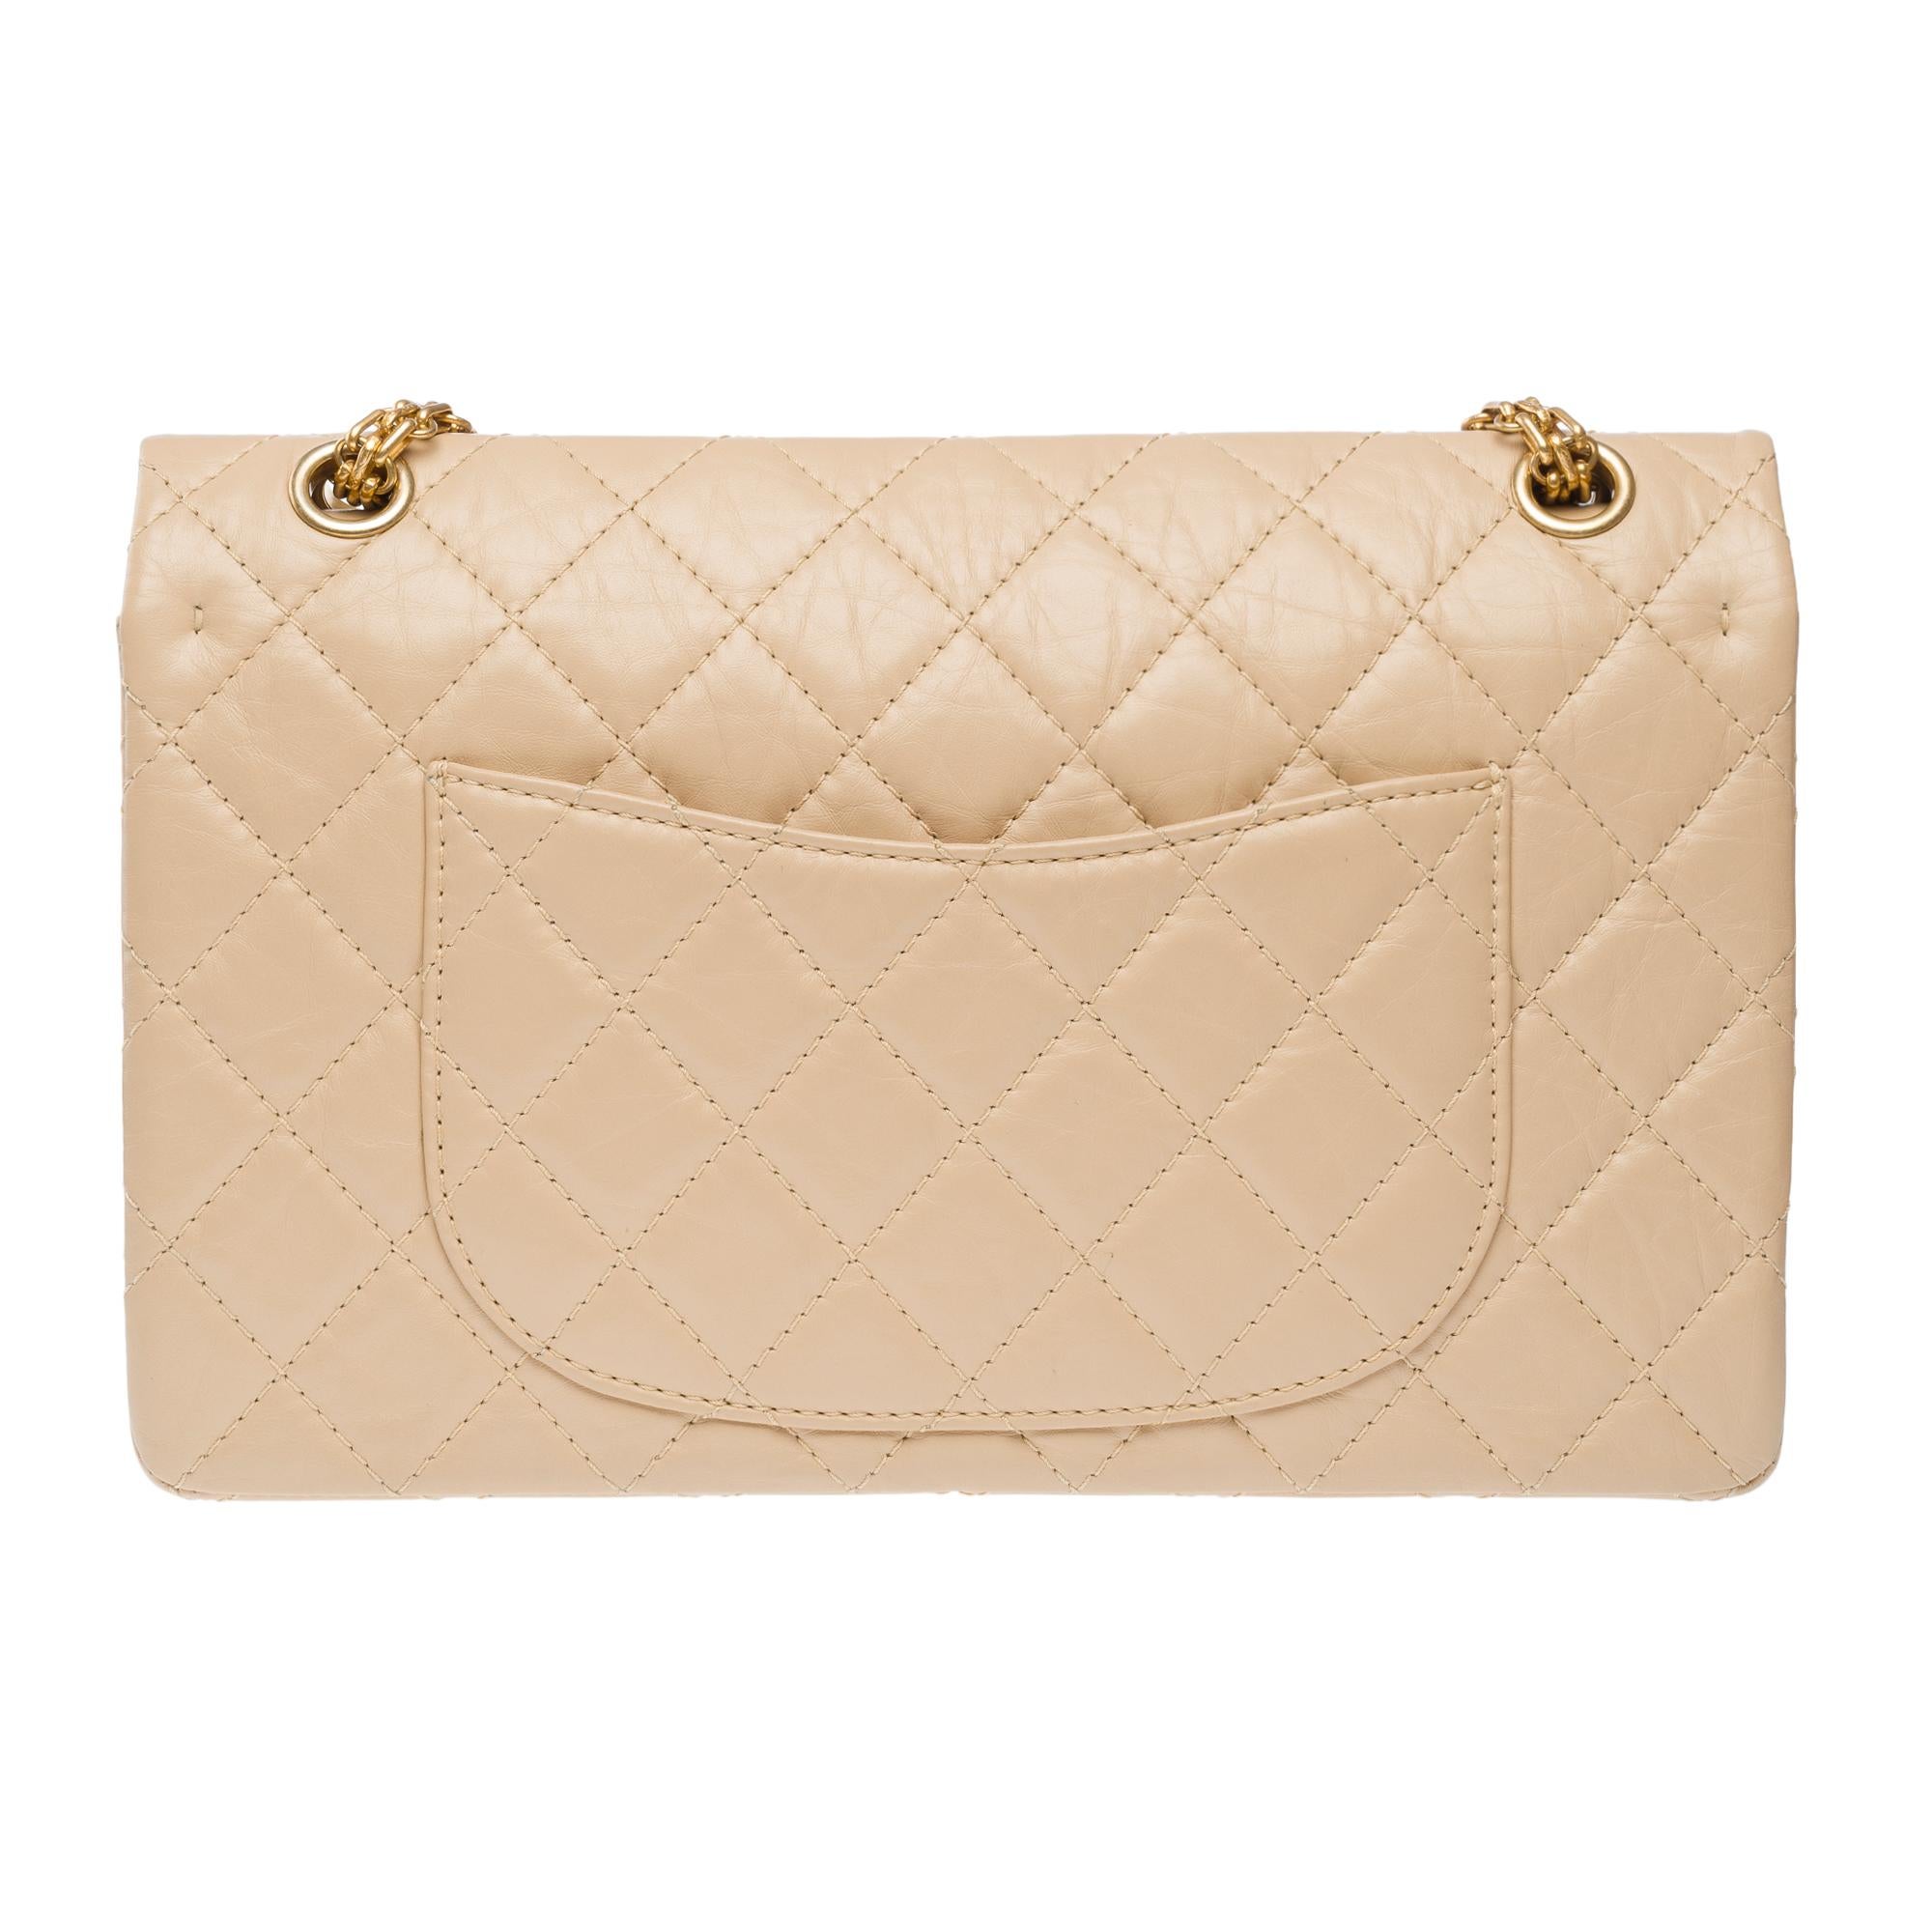 Iconic Chanel 2.55 double flap shoulder bag in quilted beige leather, GHW For Sale 1